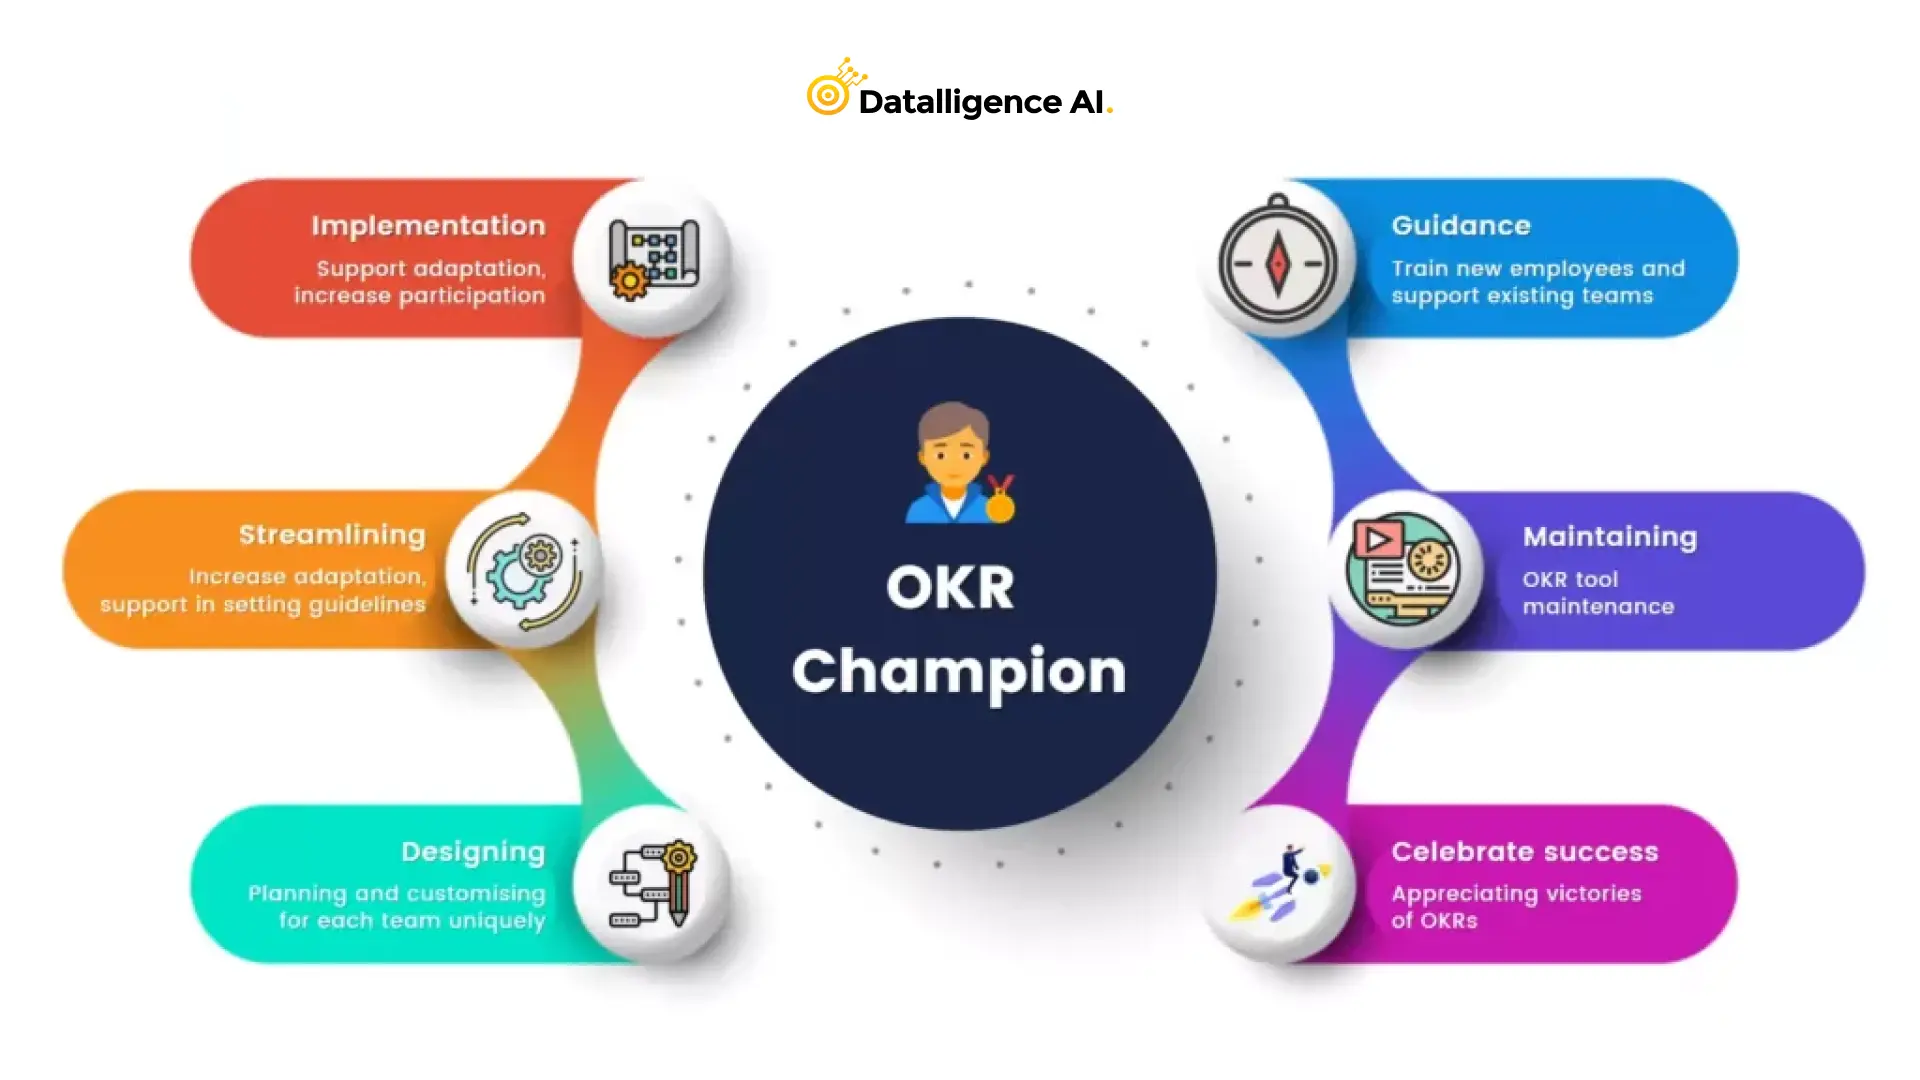 Six Popular Areas of Responsibilities for OKR Champions